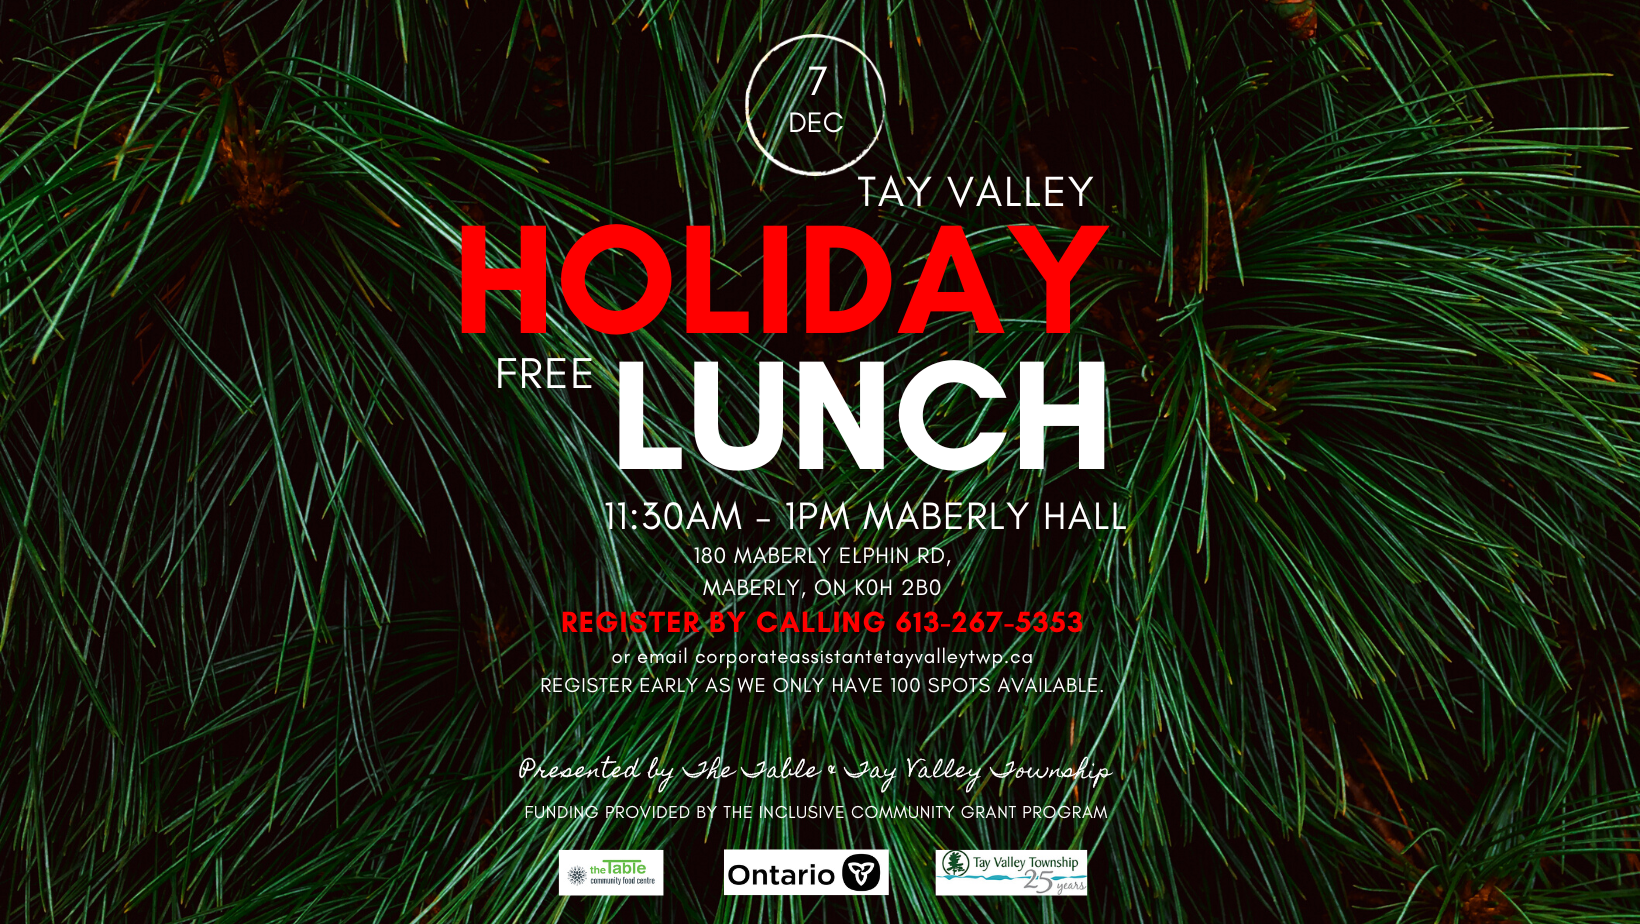 Tay Valley Holiday Lunch Poster